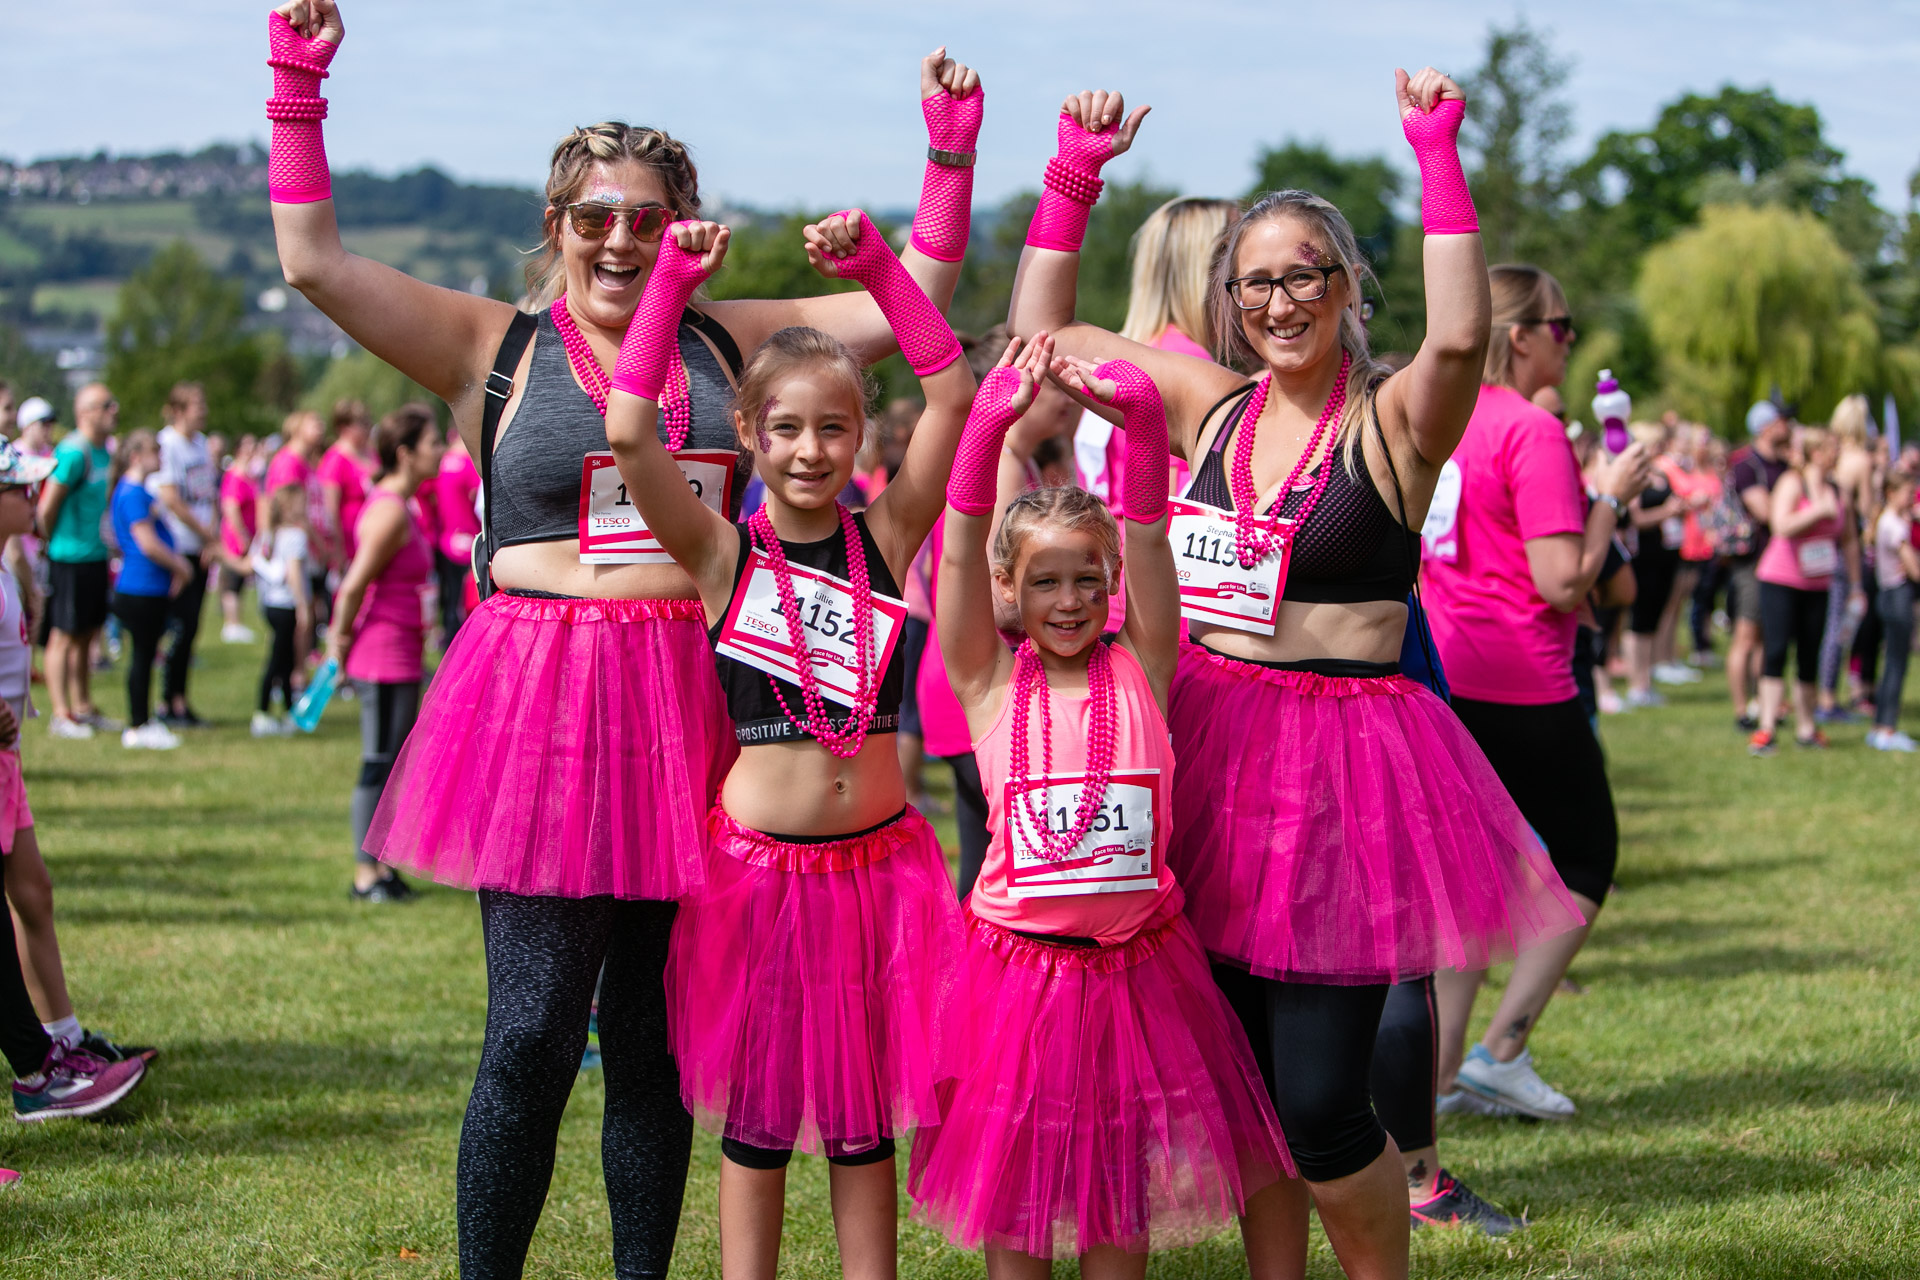 Race For Life – Cancer Research | Bristol | Bath Event Photographer